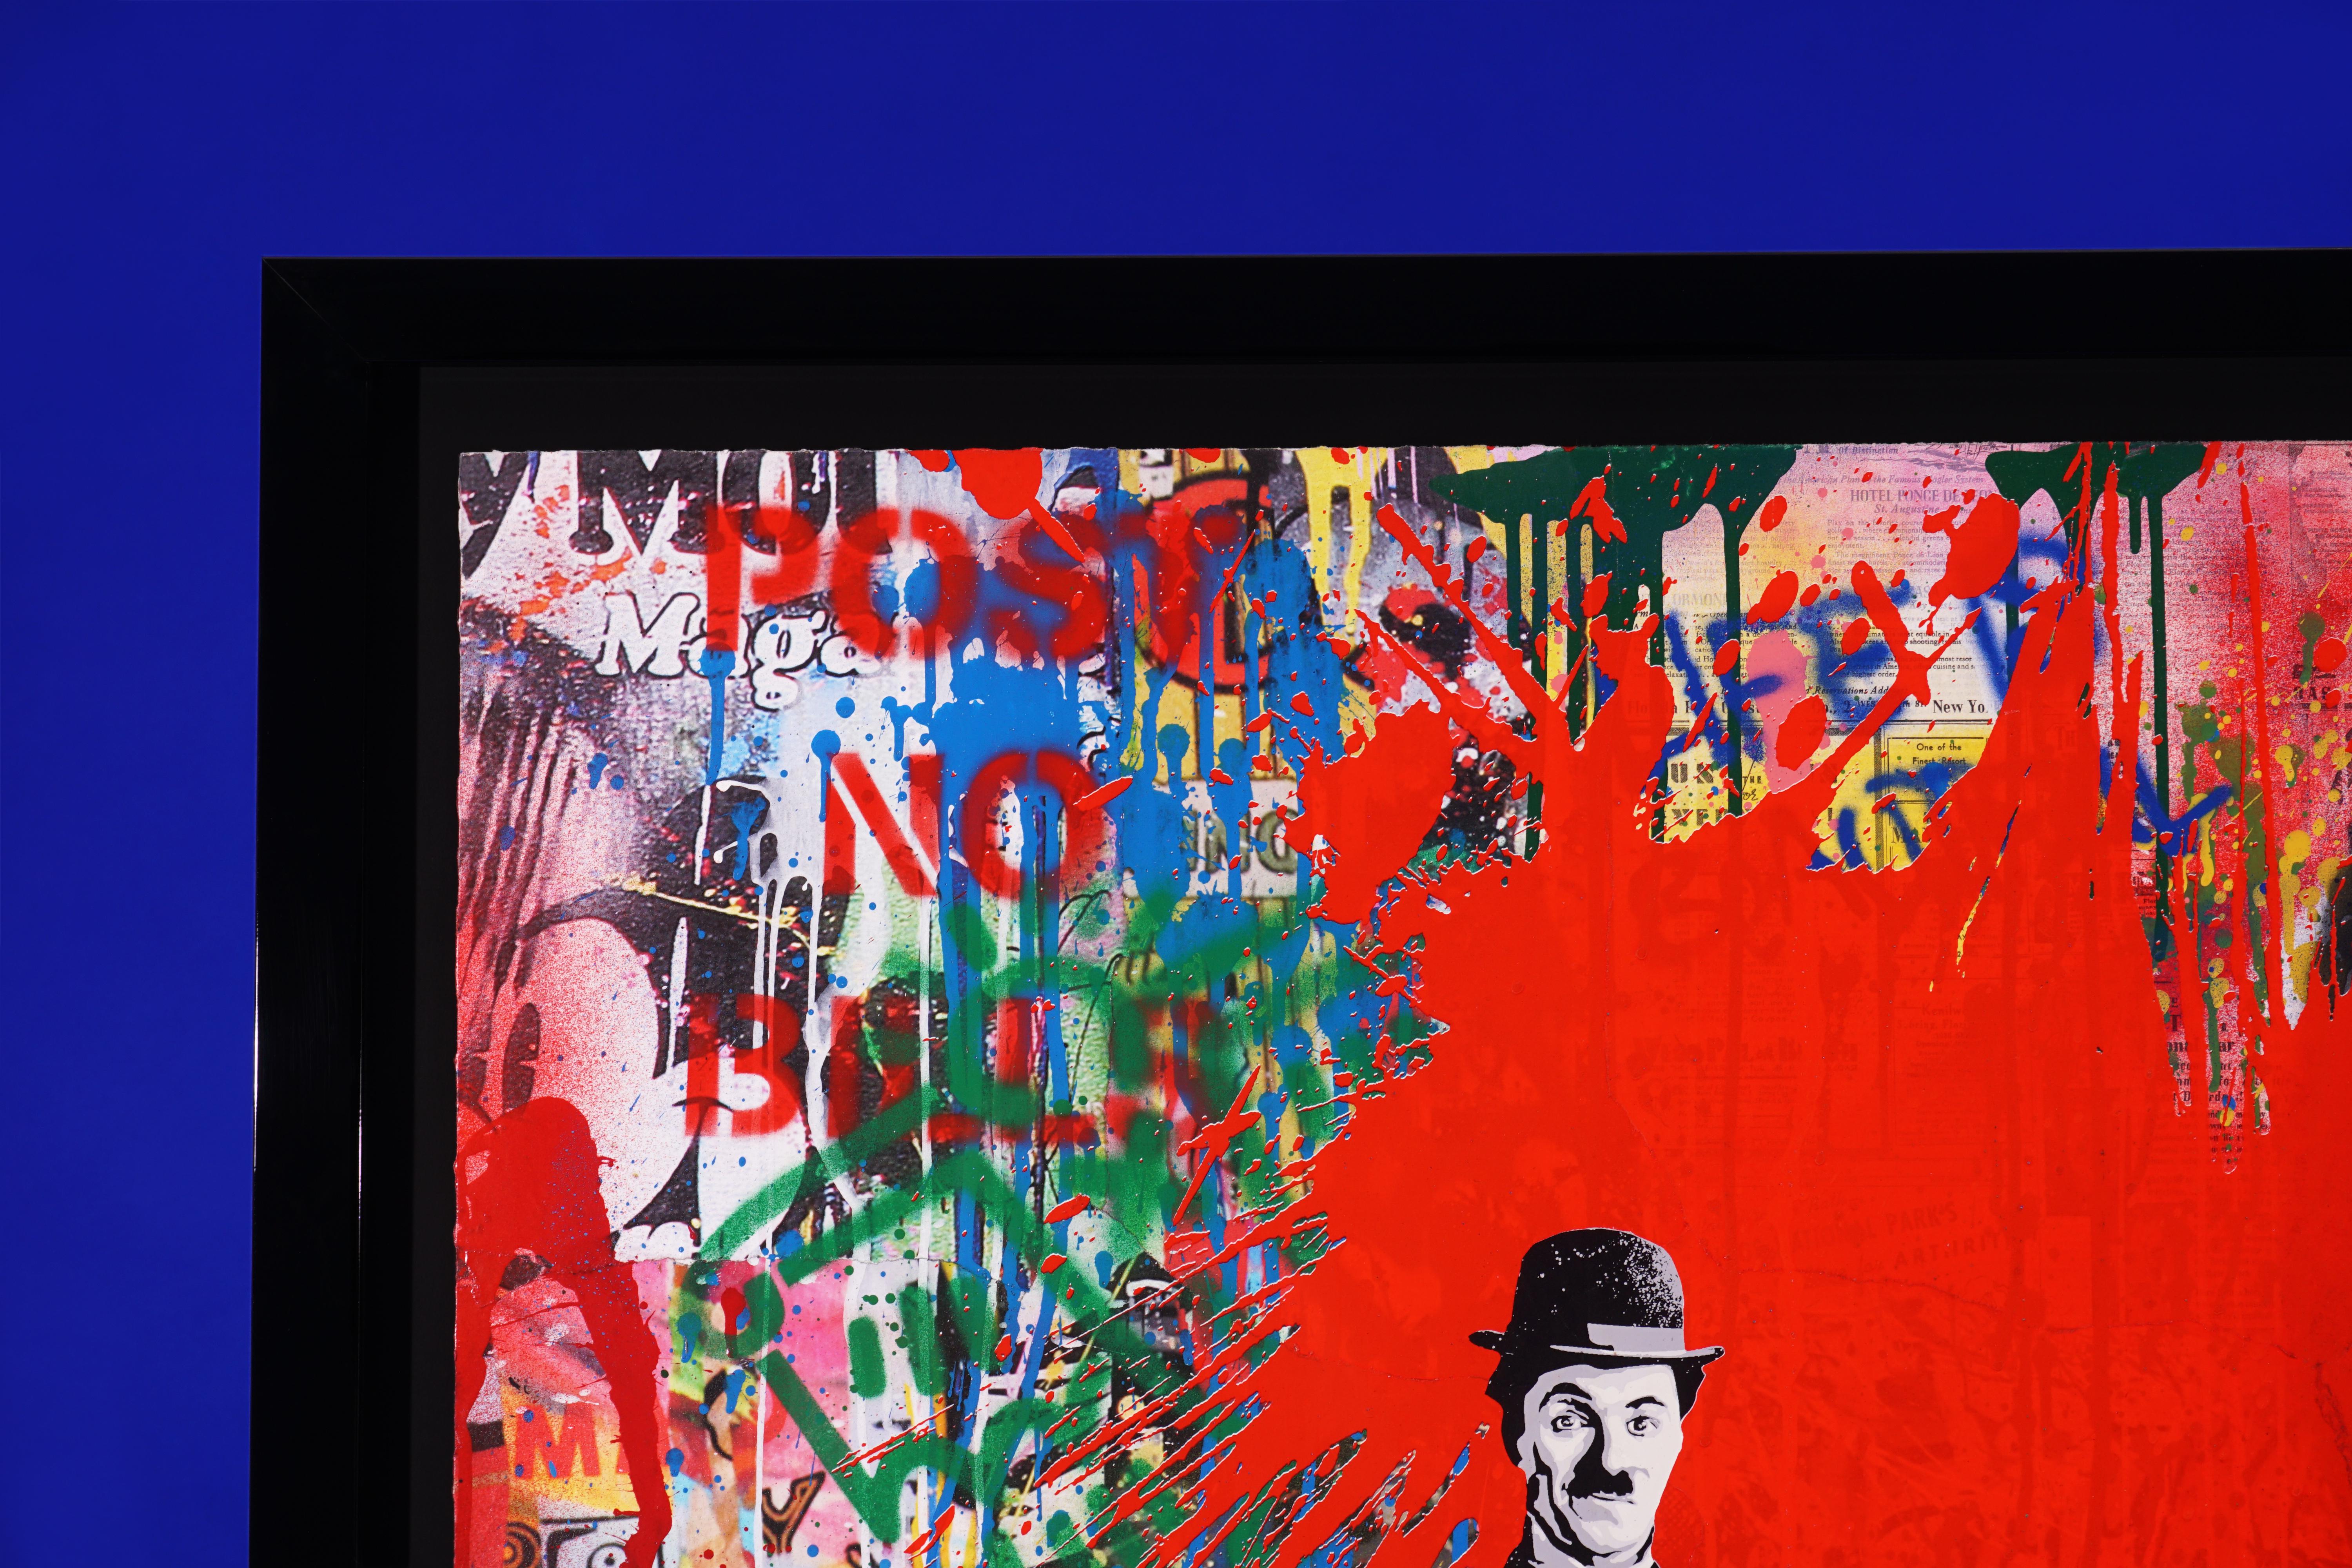 The ‘Juxtapose’ by french contemporary artist Mr. Brainwash was created in 2020 in his signature style of layering paint, stencil, and mixed media on paper to create a cultural commentary in vibrant visual format. This piece is a unique painting on